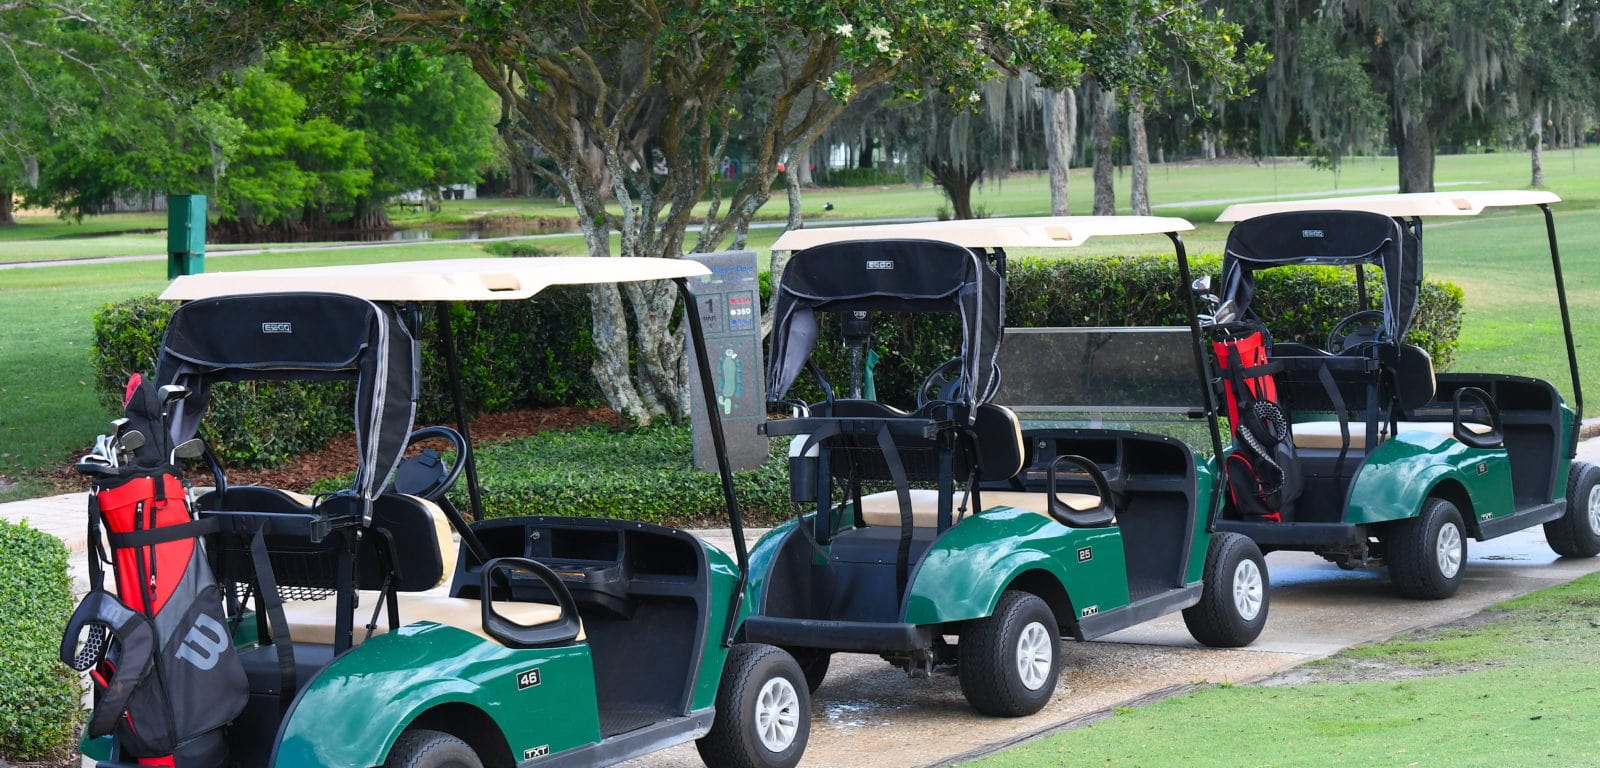 3 golf carts lined up